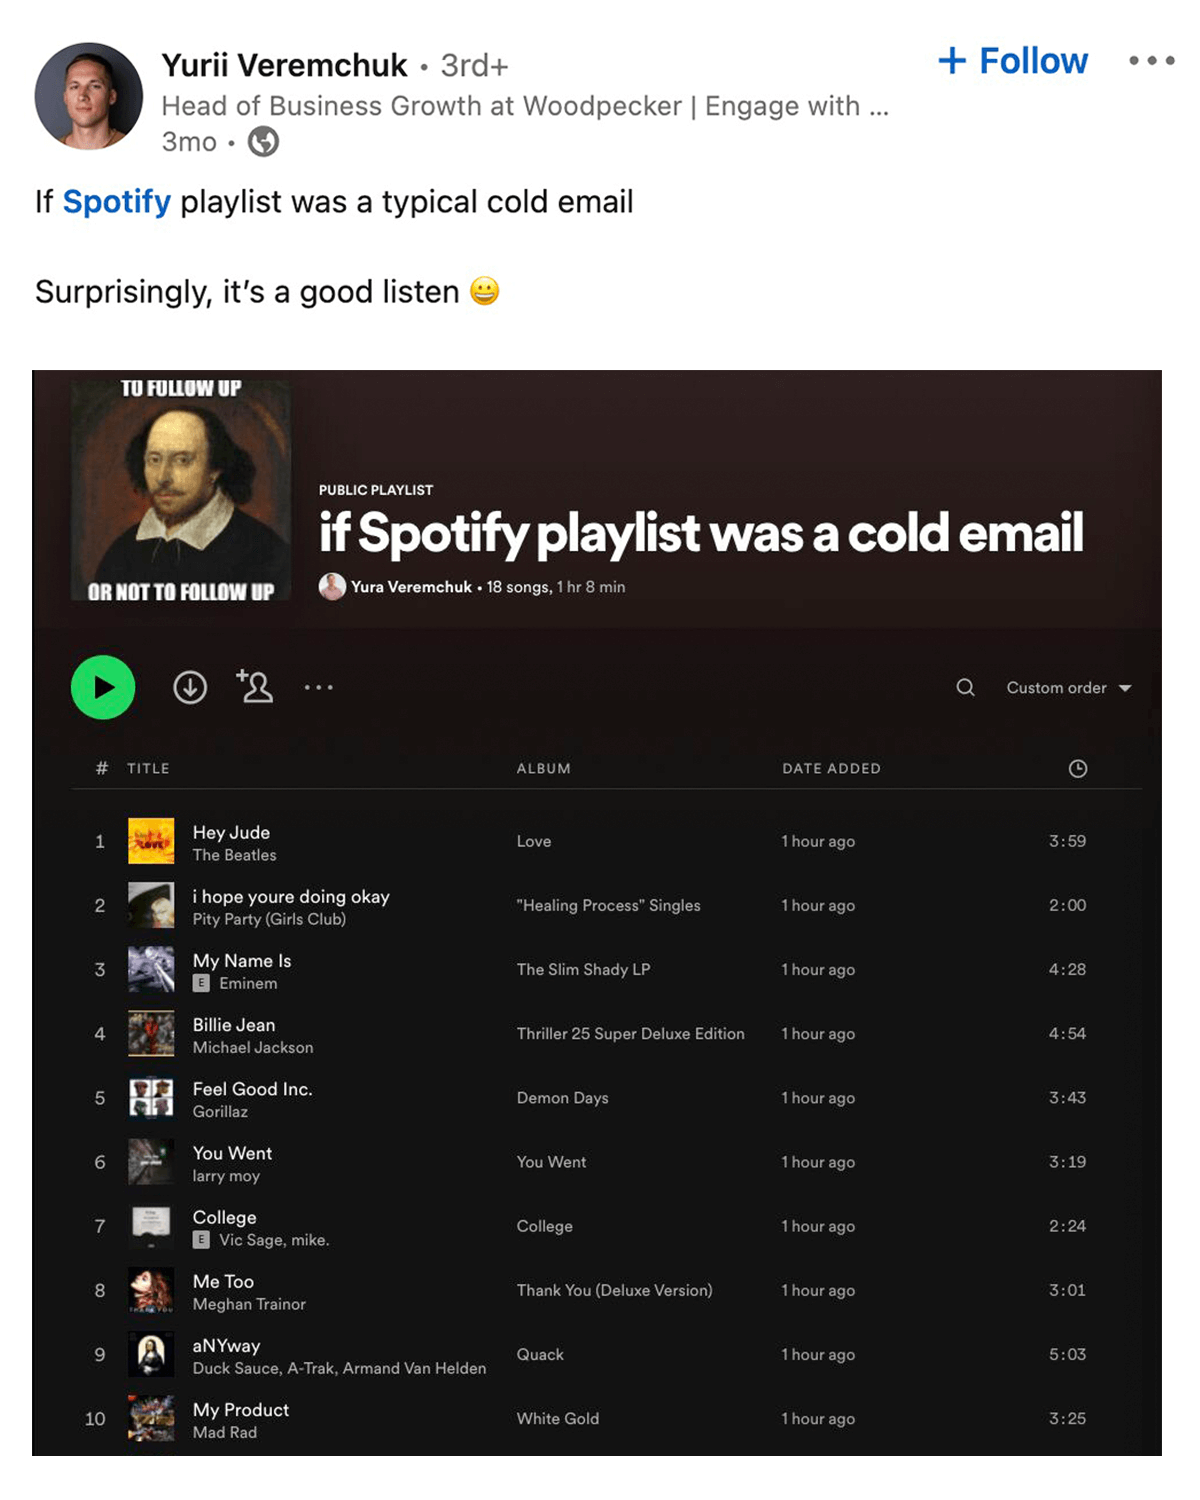 Yurii Veremchuk on LinkedIn: If Spotify playlist was a typical cold email. Surprisingly, it's a good listen :D